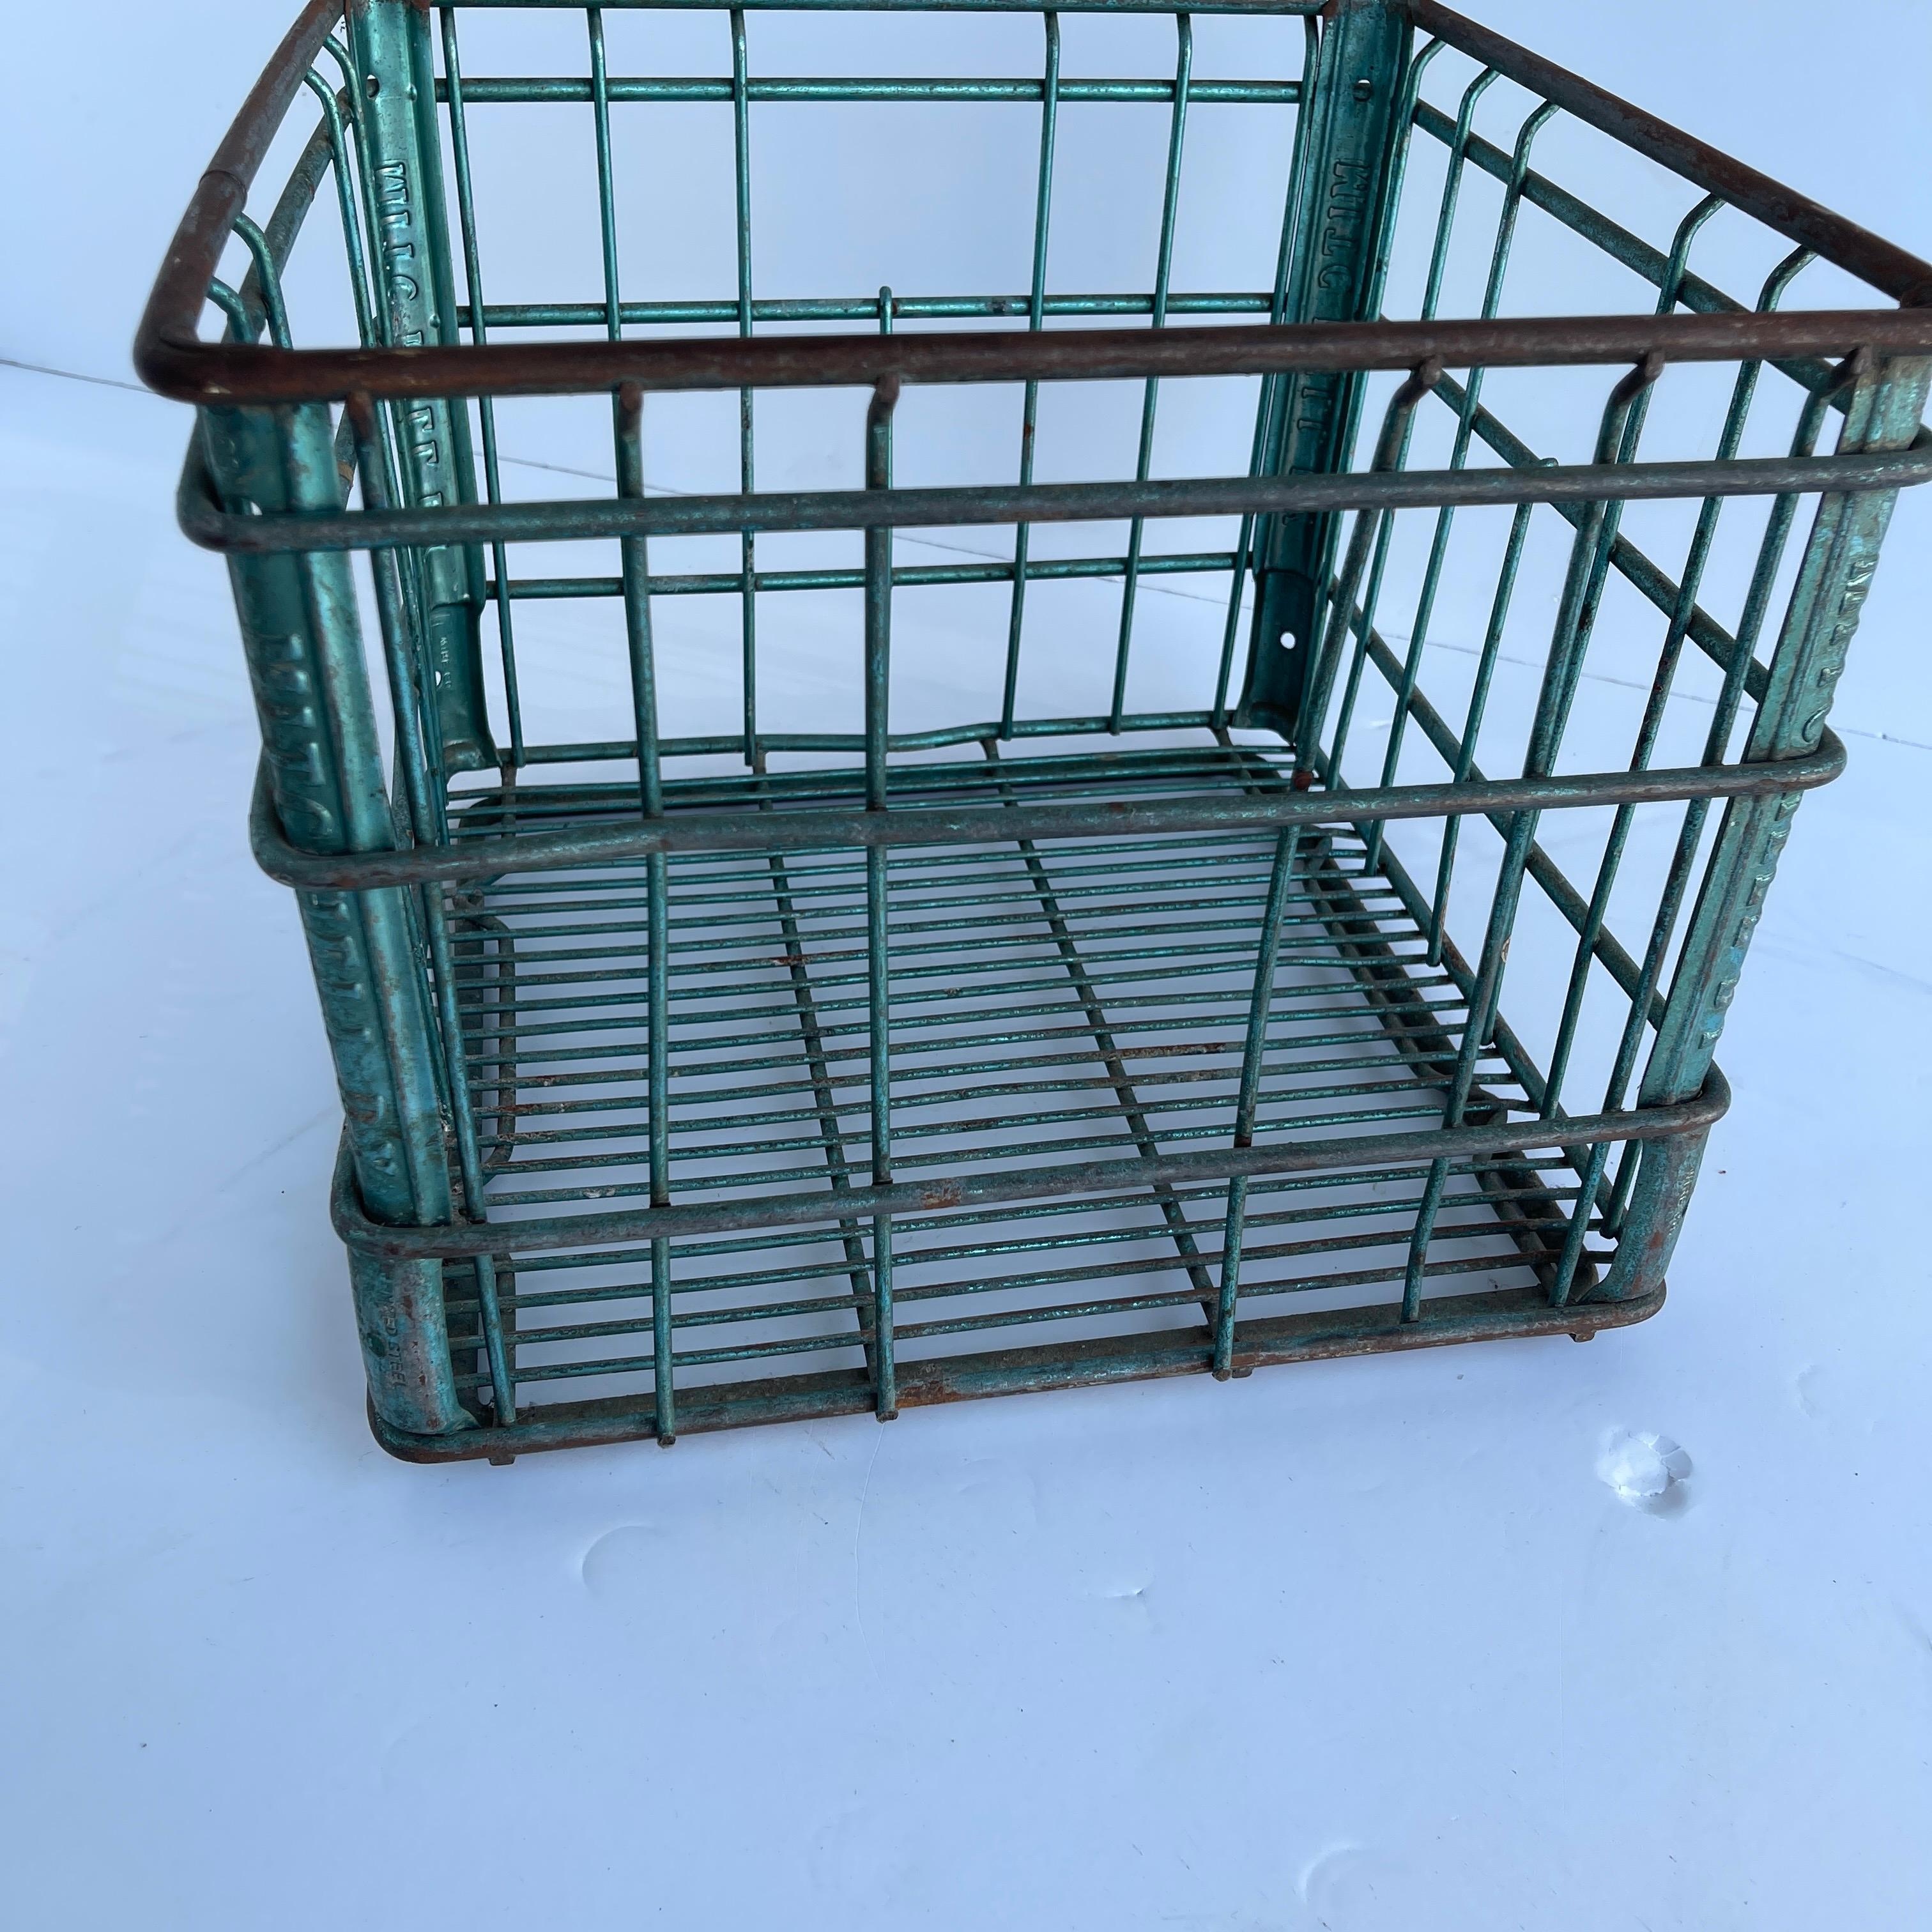 Mid-20th Century Vintage Metal and Wire Milk Crate Basket